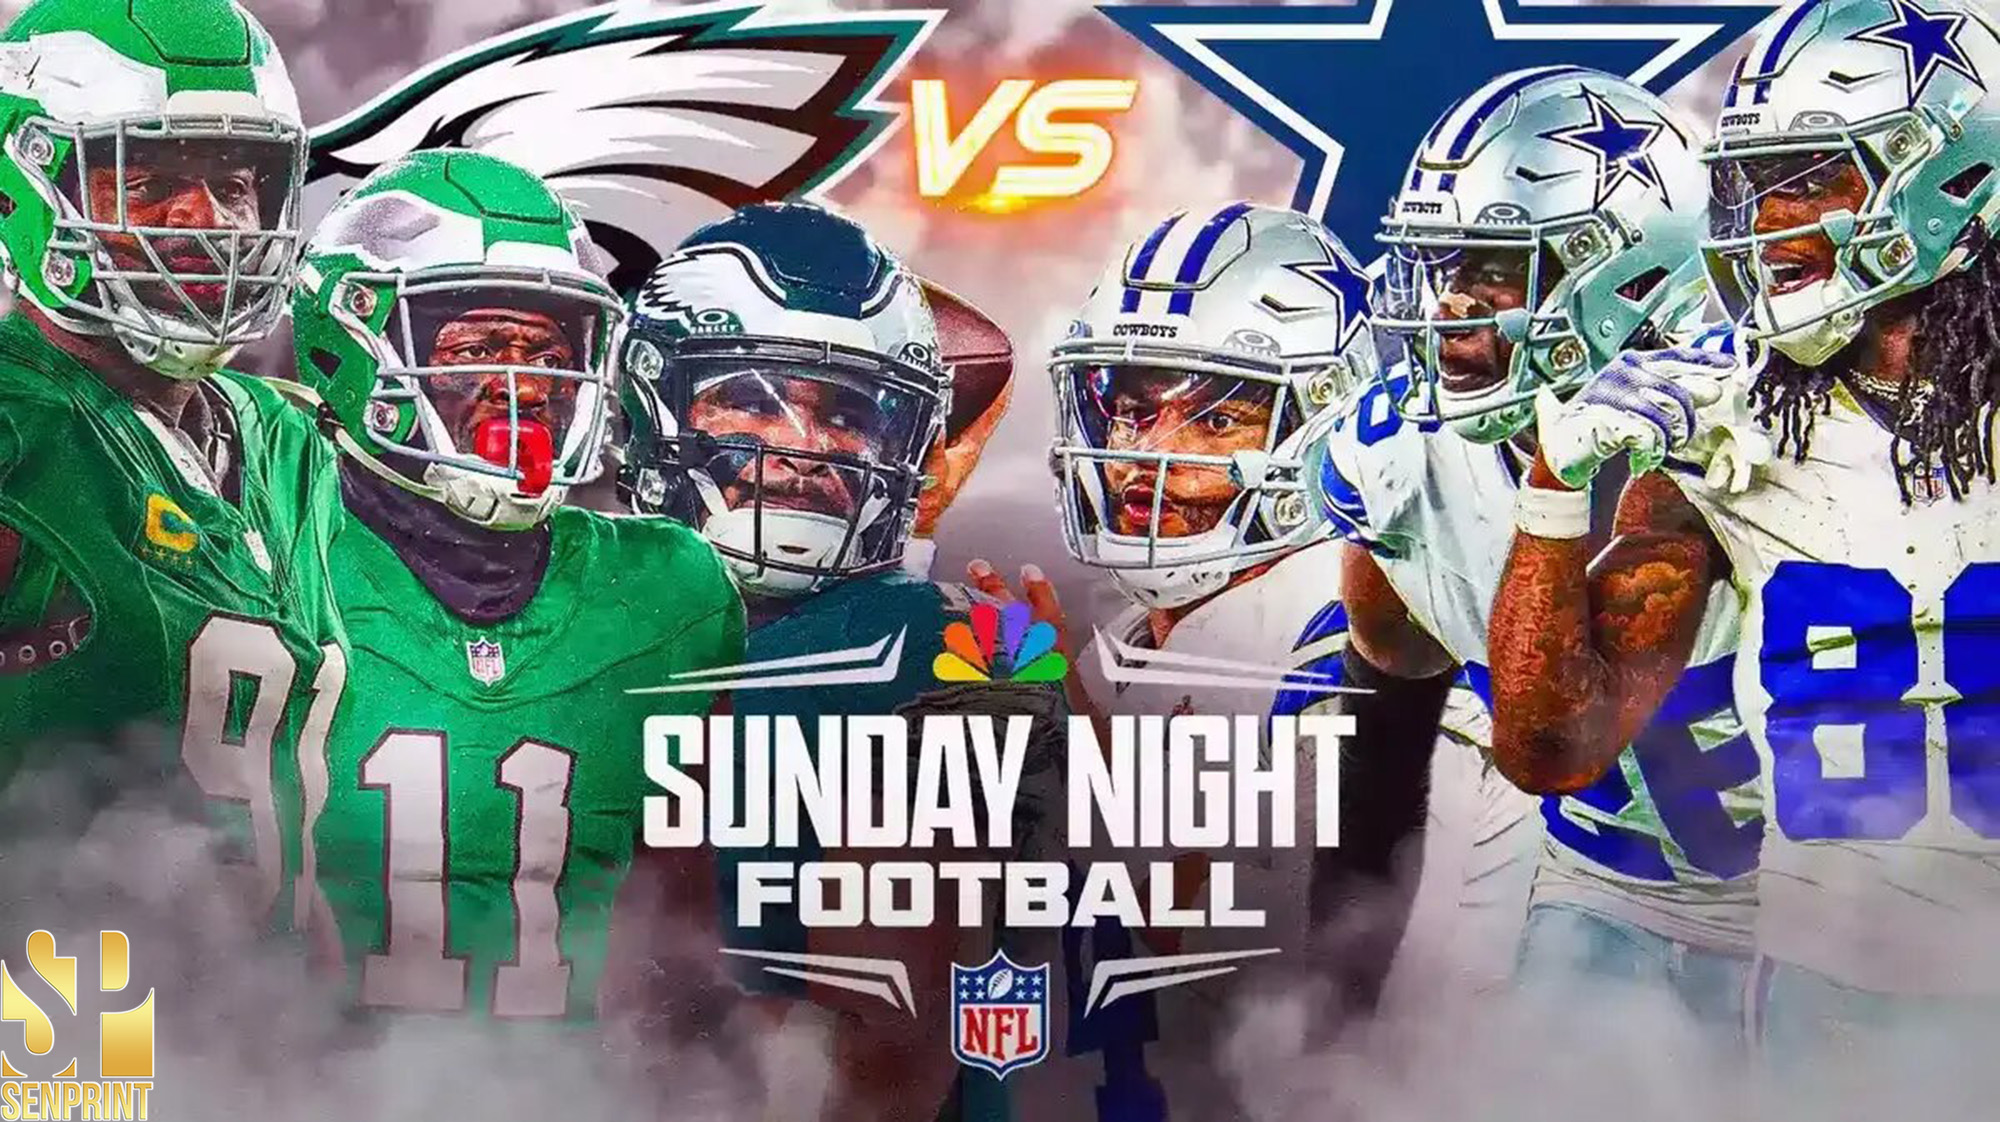 Clash of Titans Forecasting the High-Stakes Week 14 NFL Showdown Between the Dallas Cowboys and Philadelphia Eagles